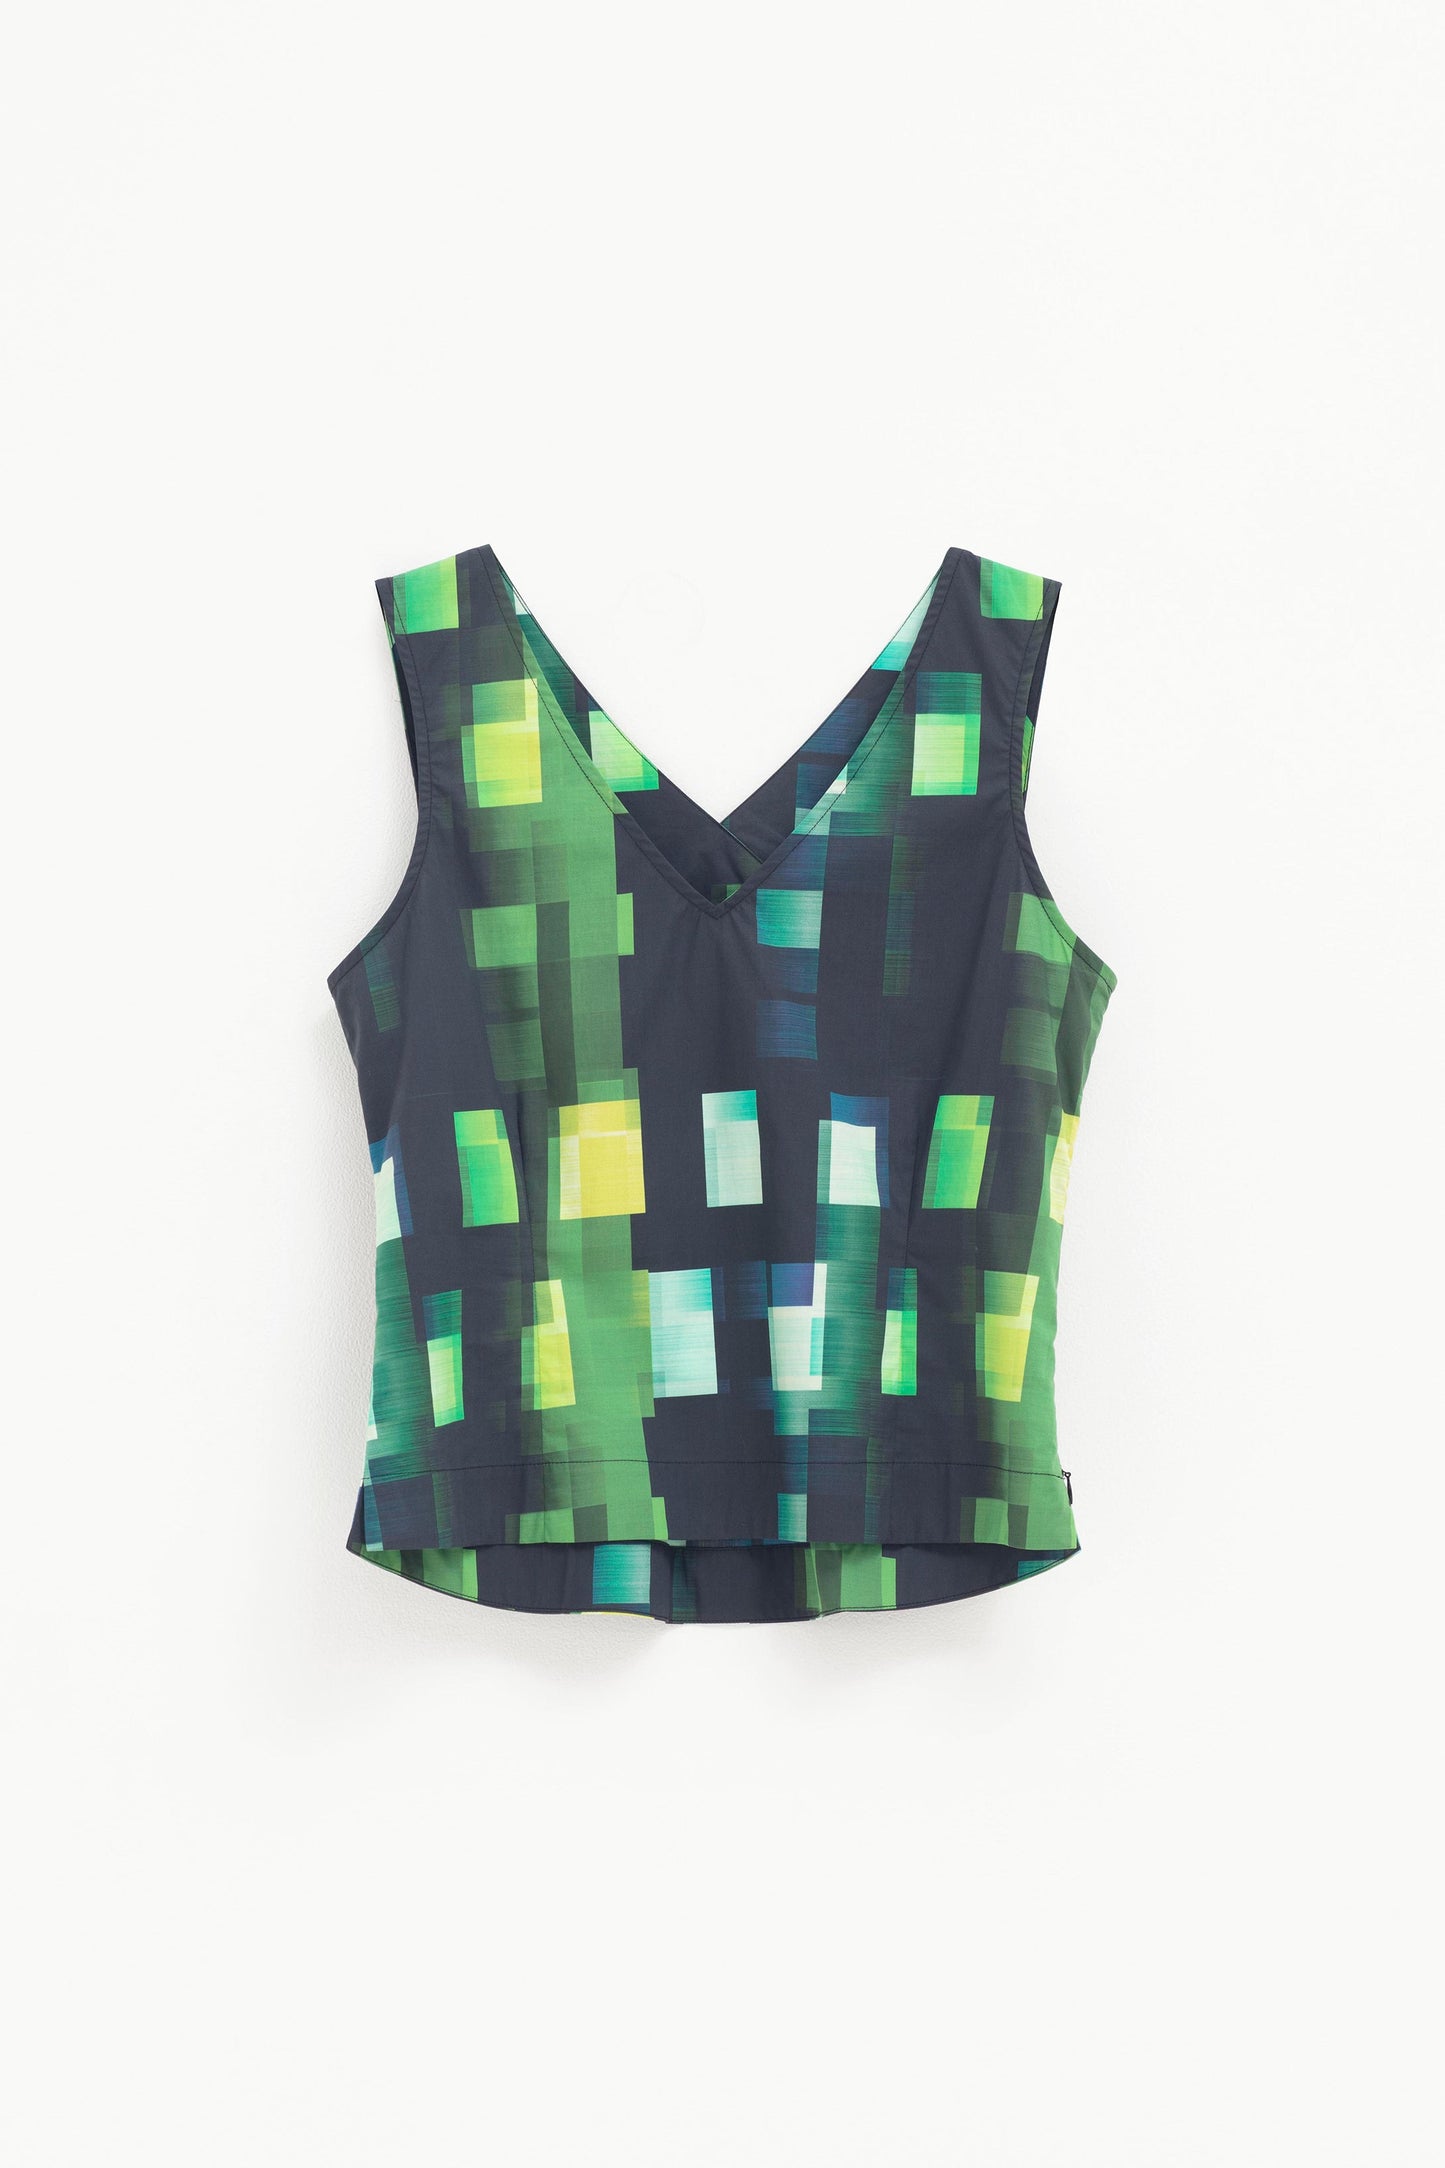 Indi Organic Cotton Print Tank with Back Cut Out Front | GREEN SHUTTER GRID